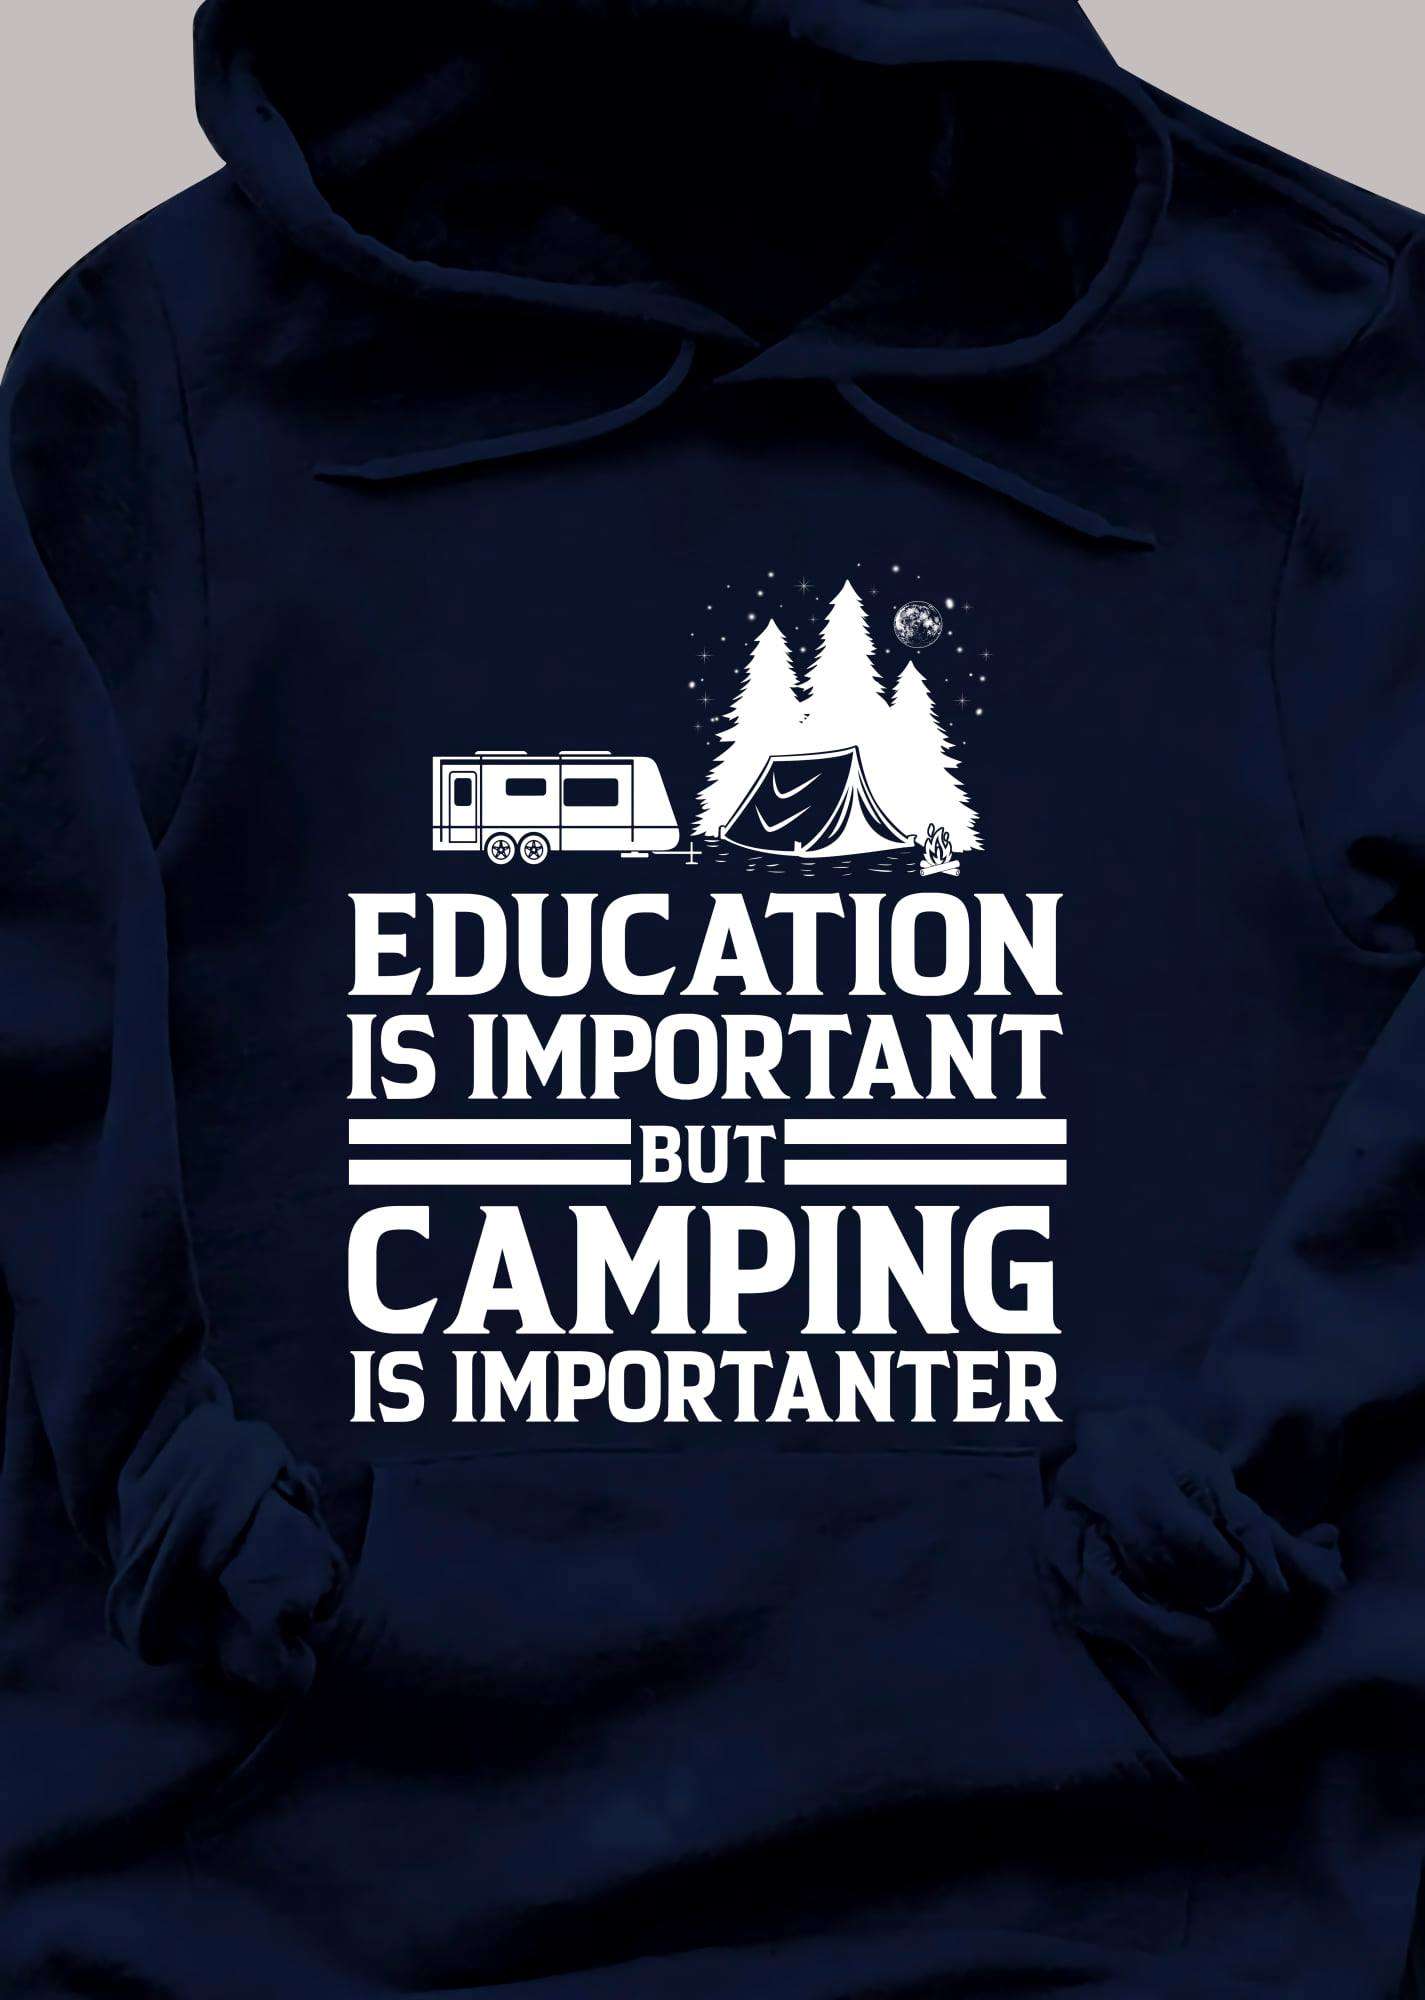 Education is important but camping is importanter